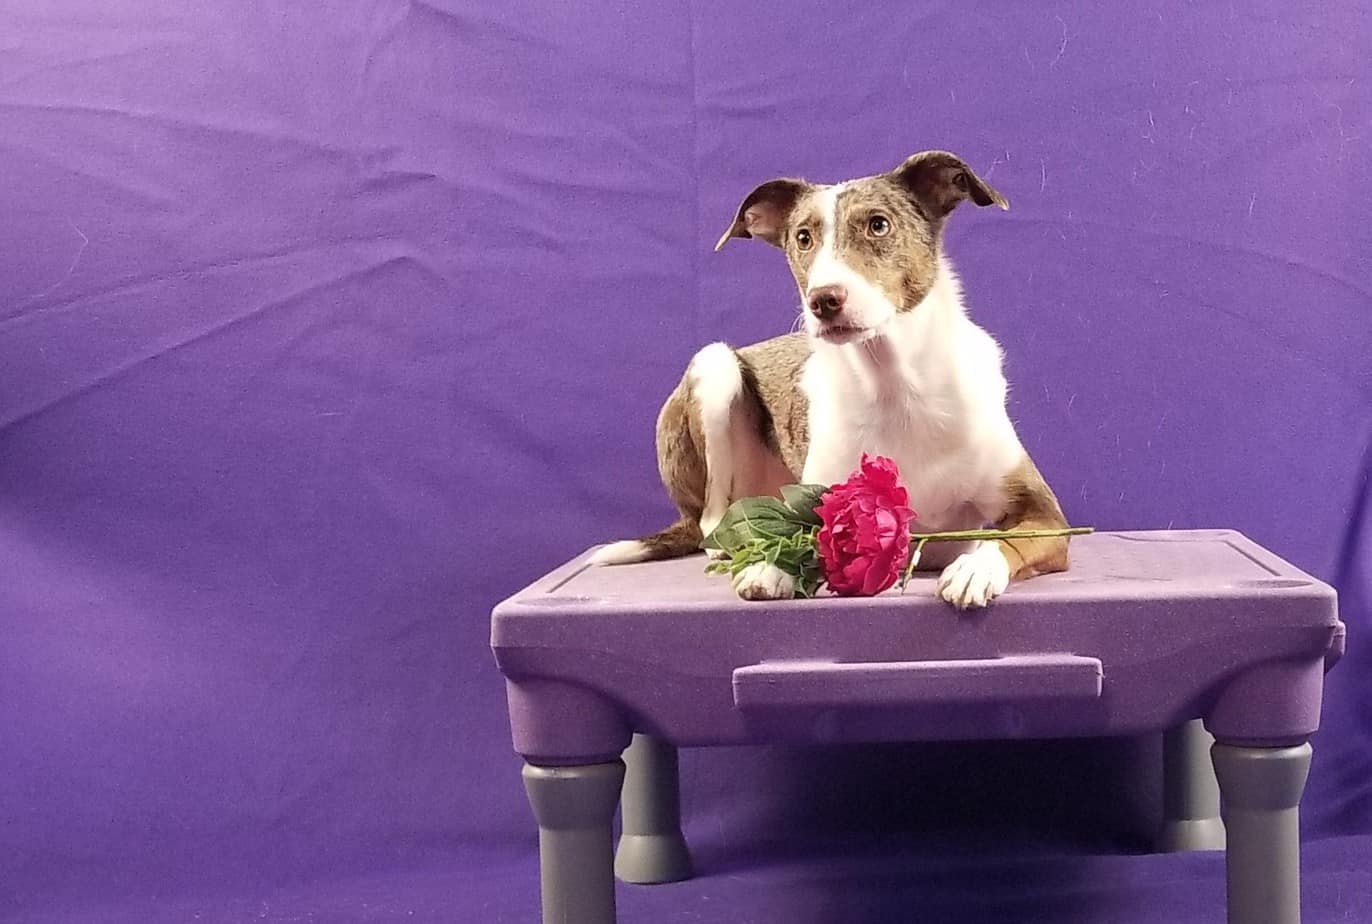 Trick dog laying on table with flowers